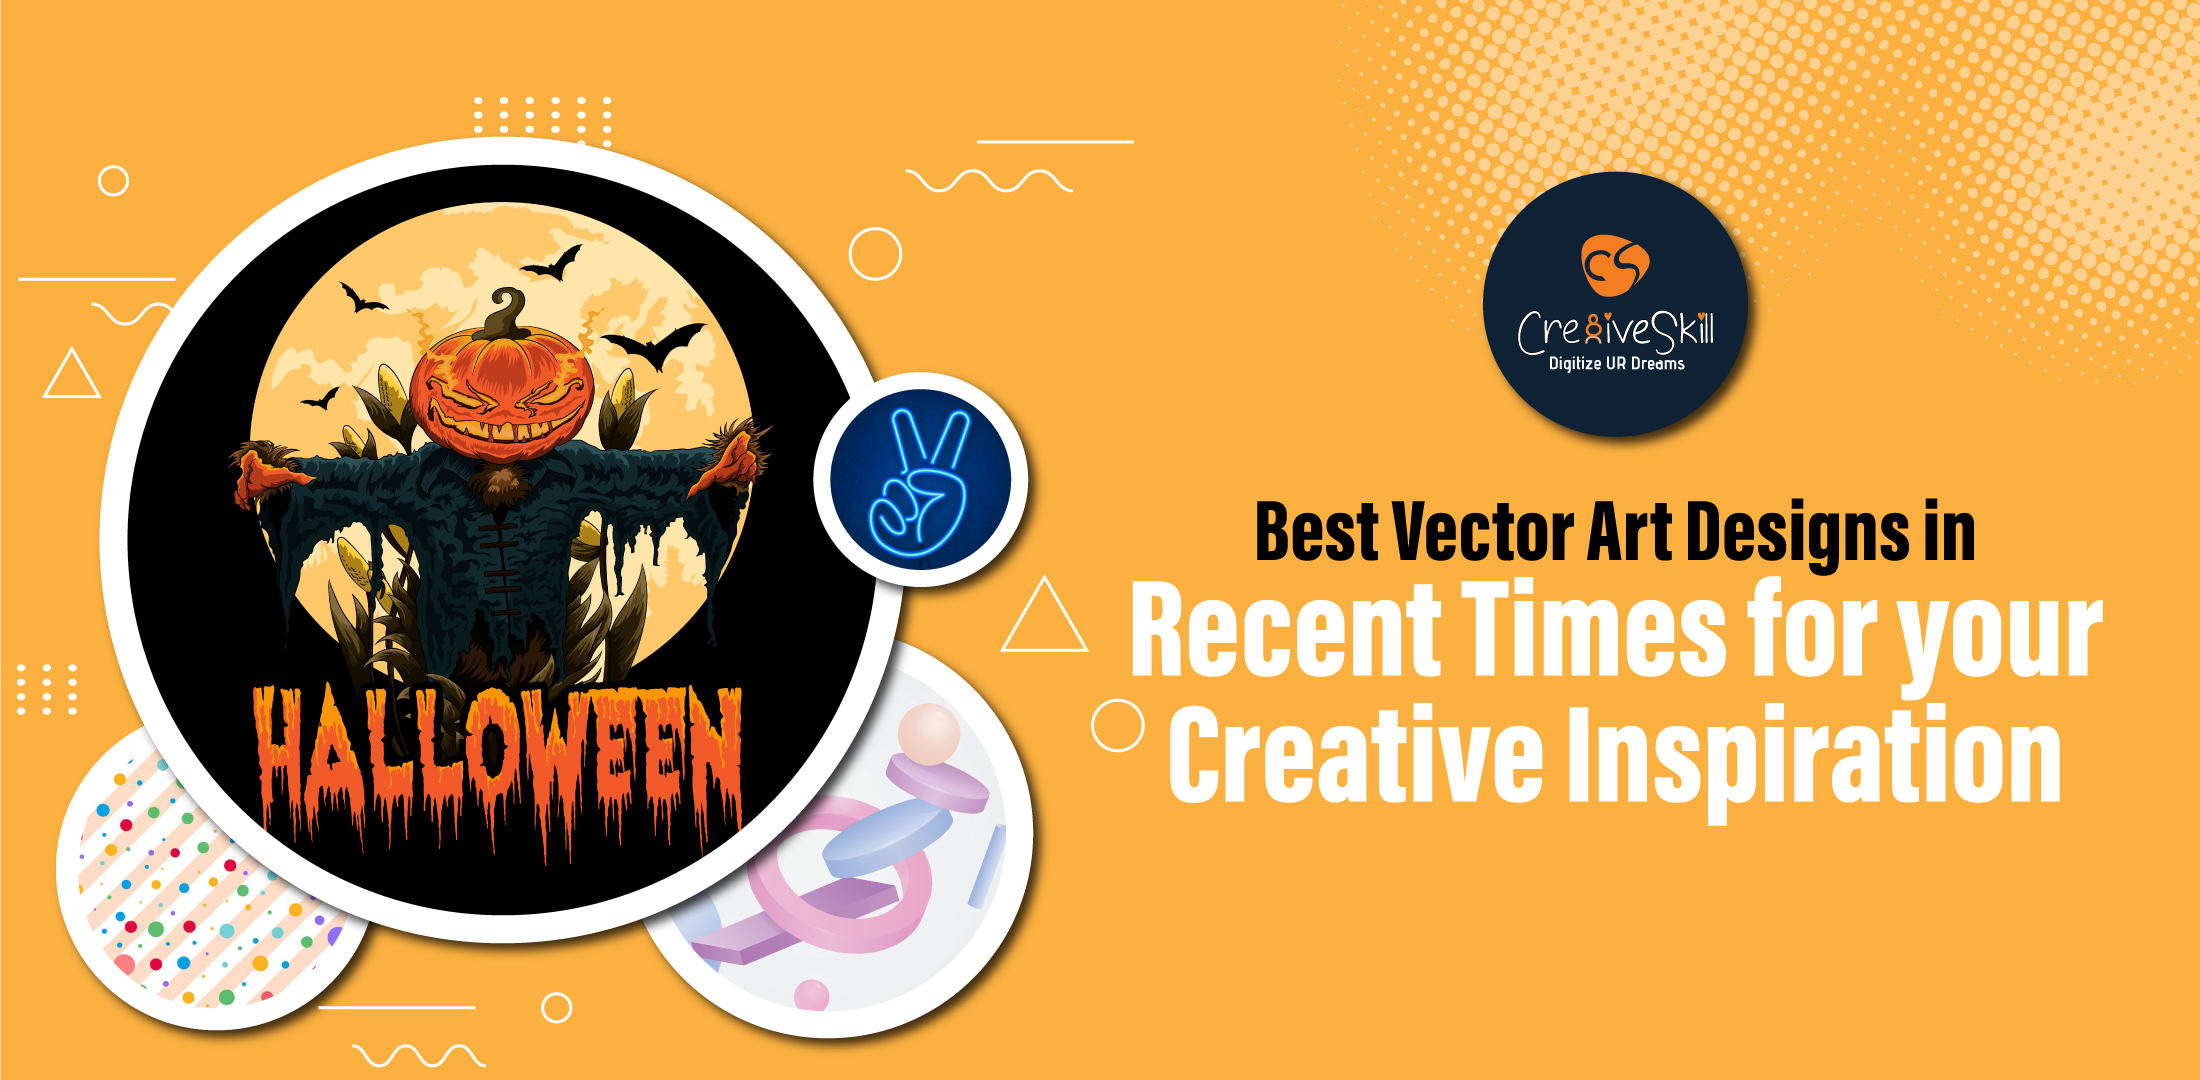 The best vector art designs of different types